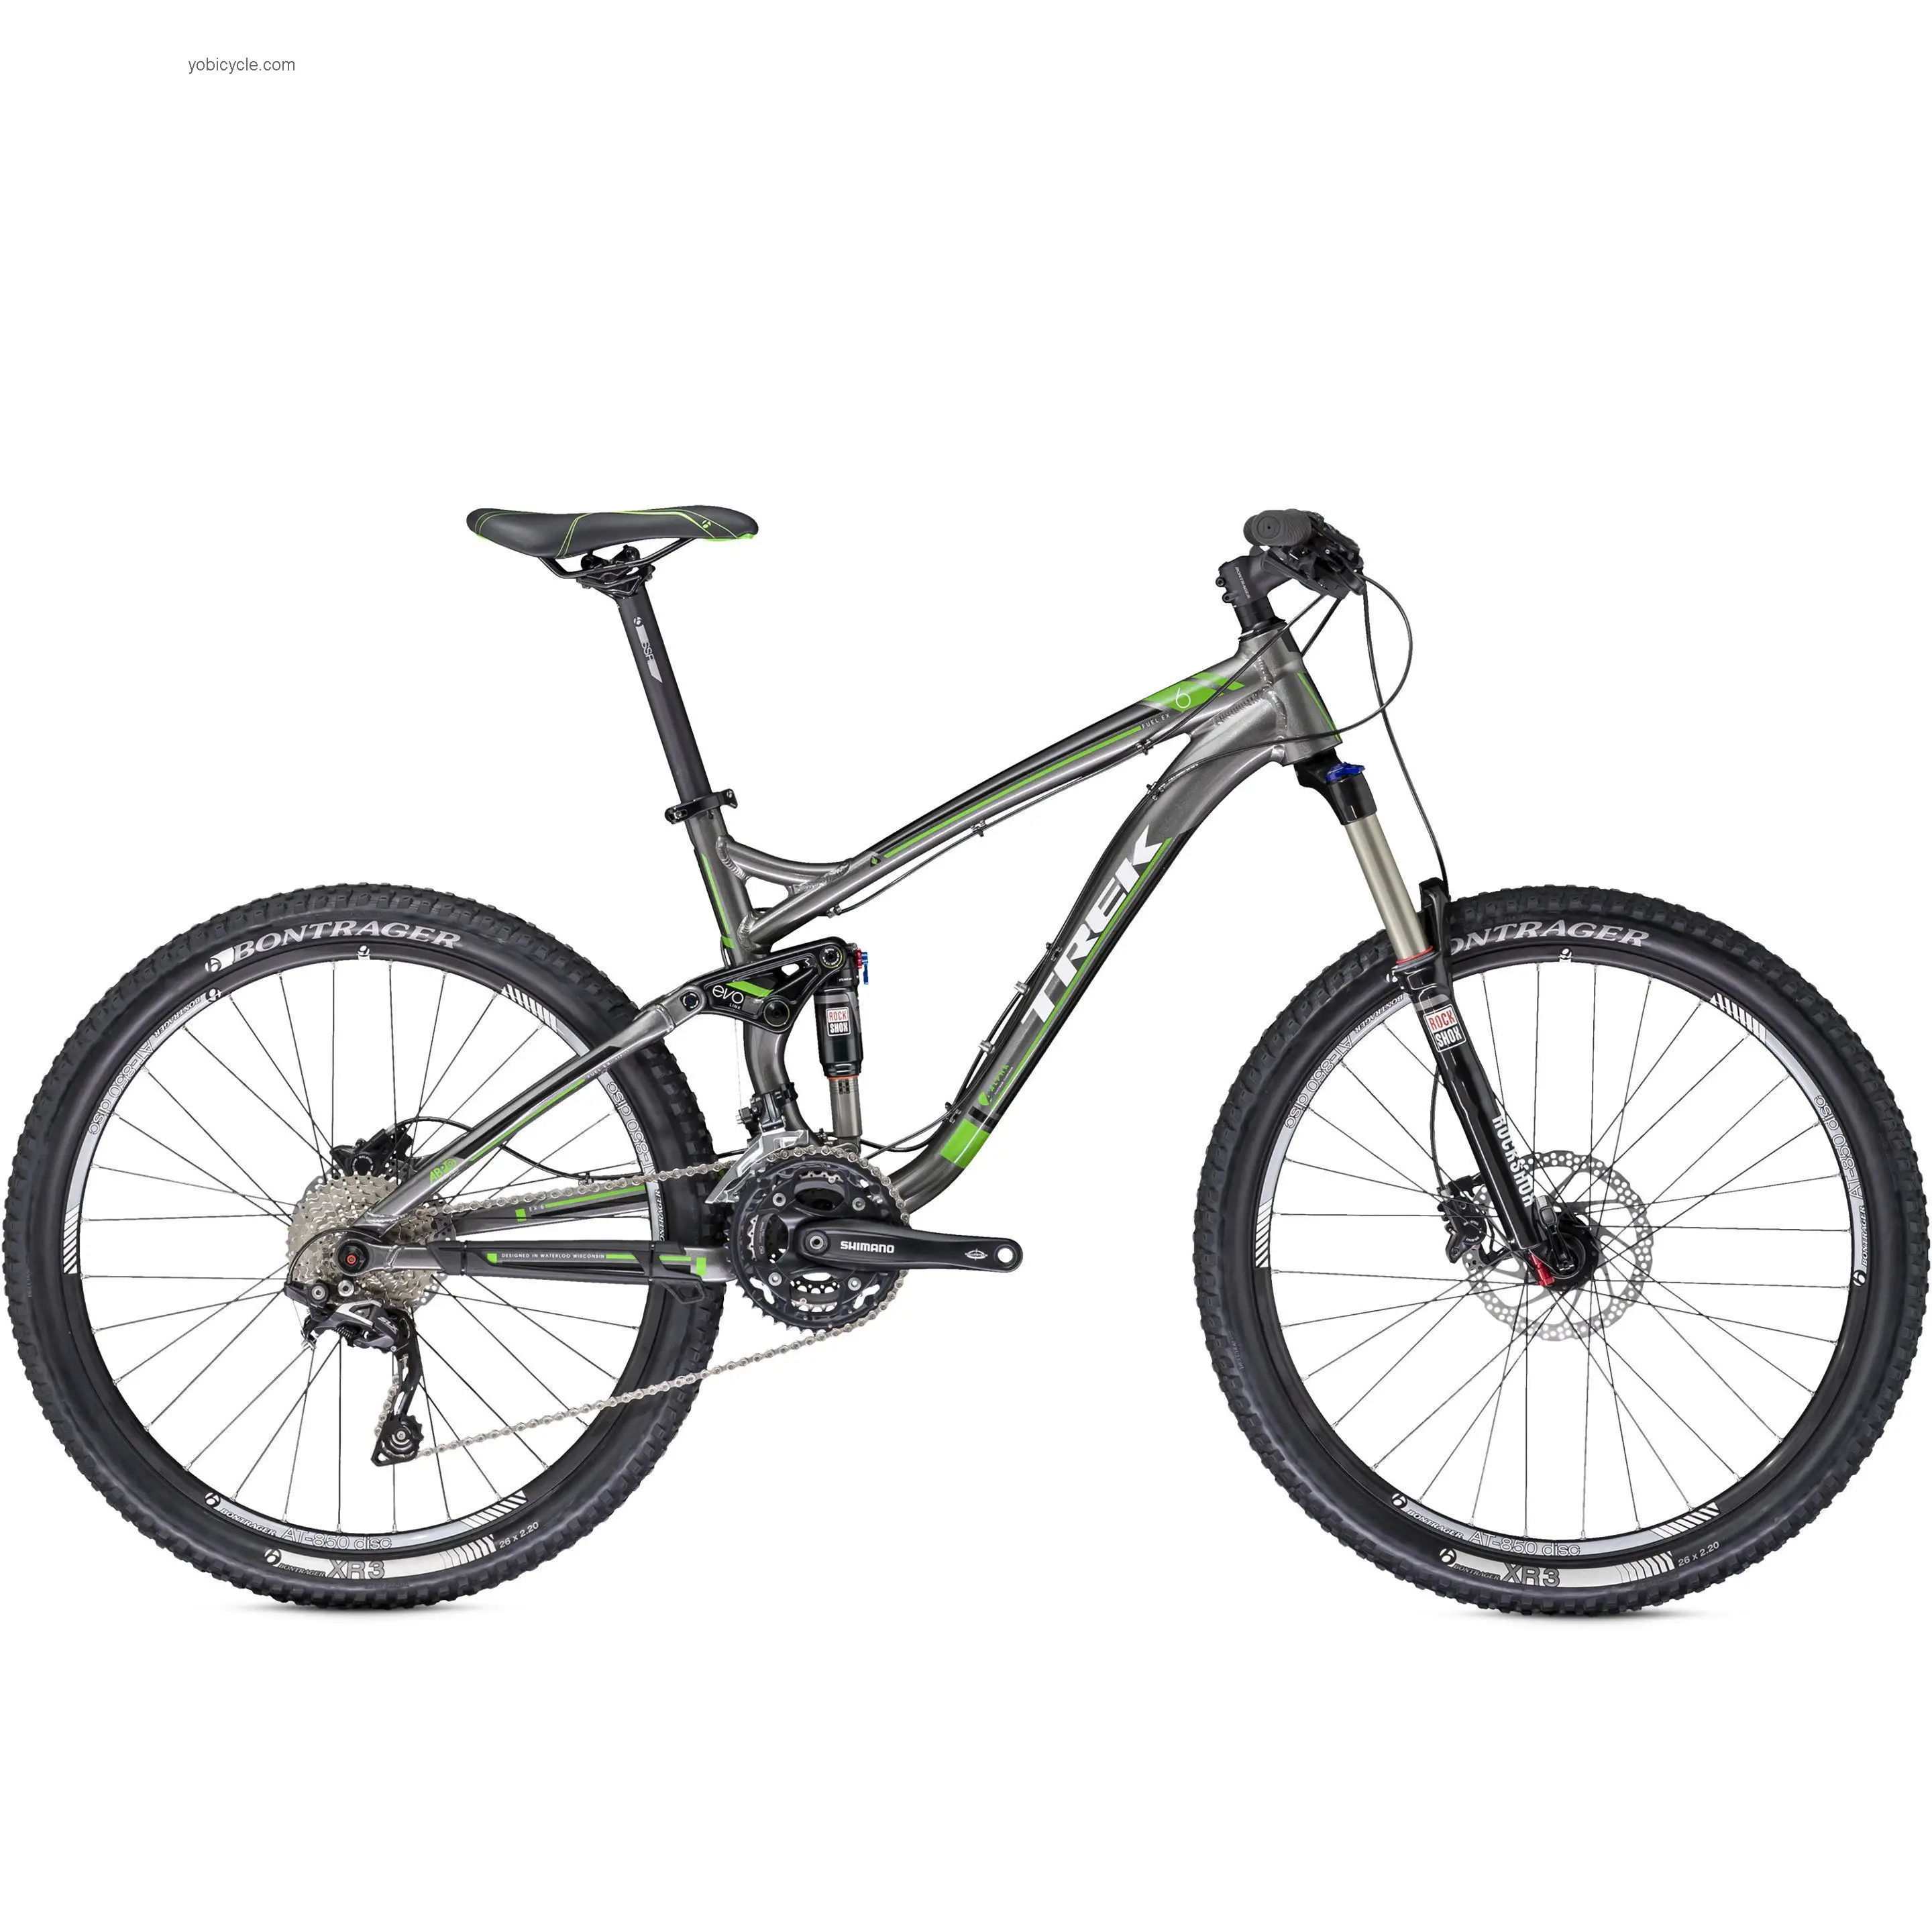 Trek Fuel EX 6 26 competitors and comparison tool online specs and performance